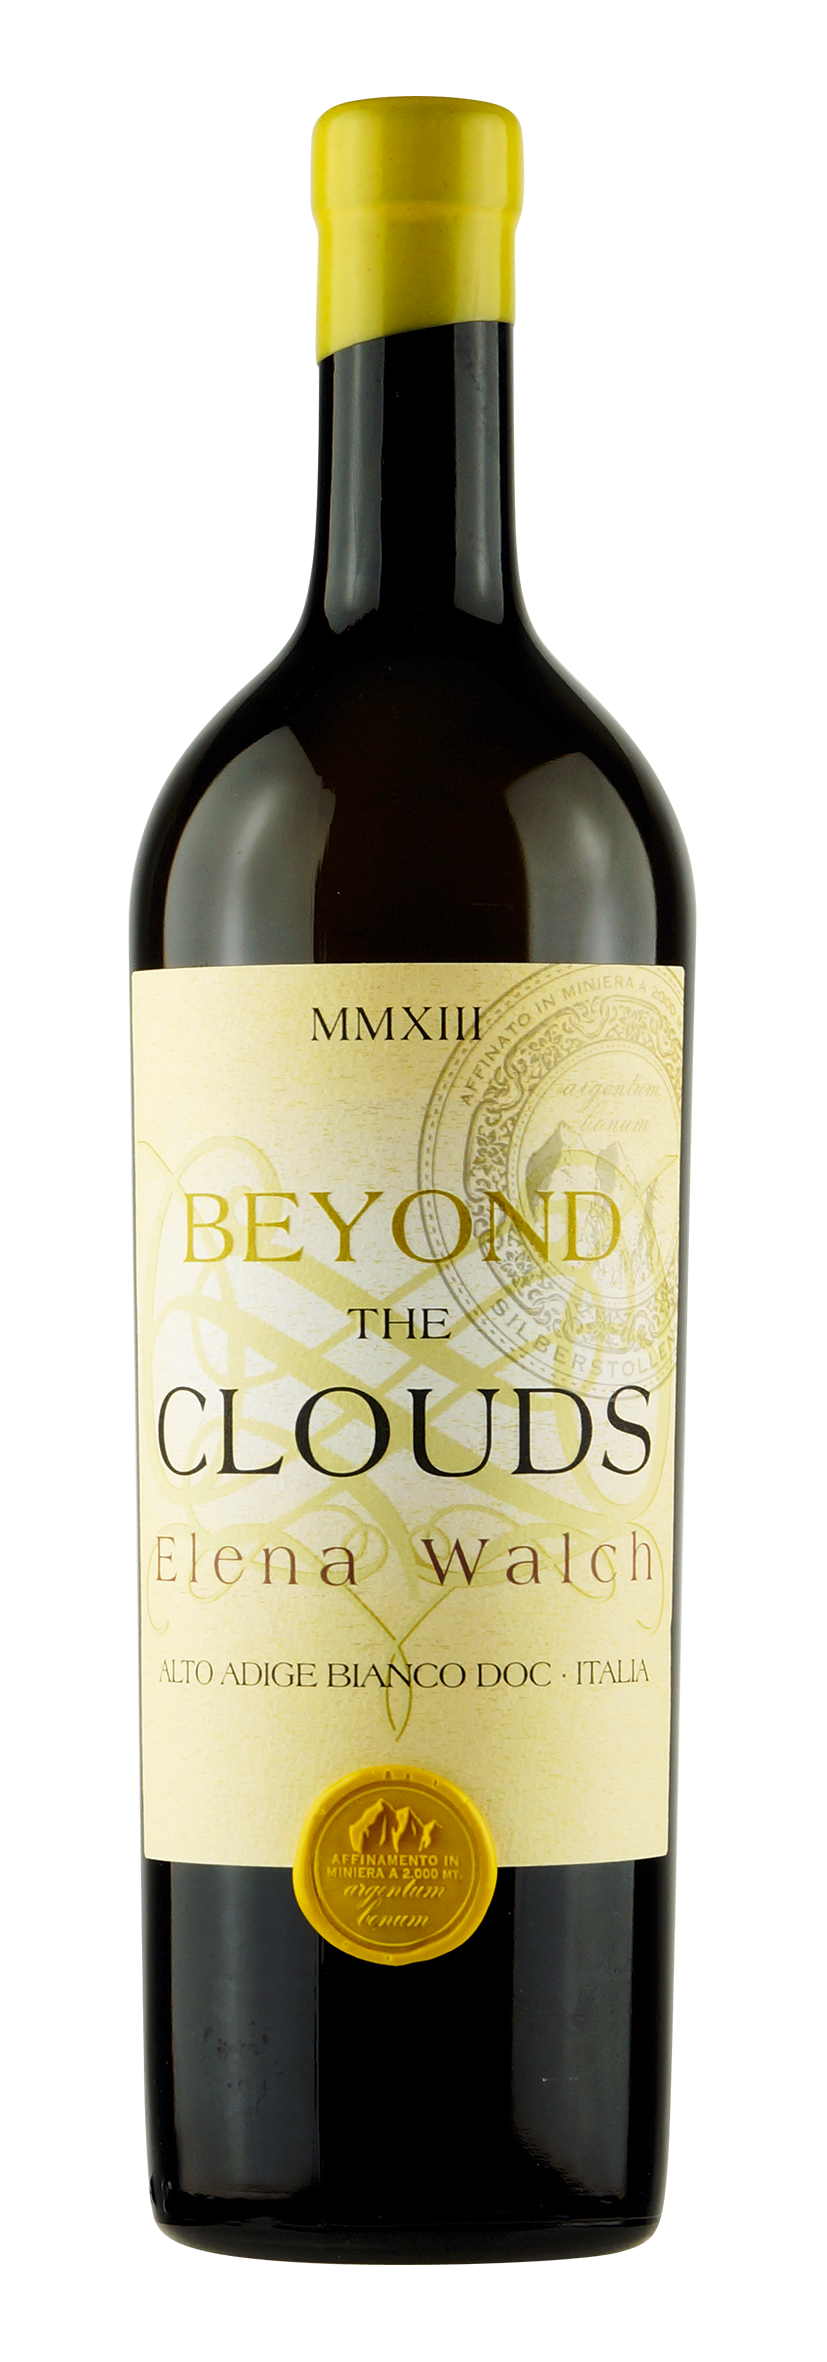 Alto Adige DOC Beyond the Clouds 2013